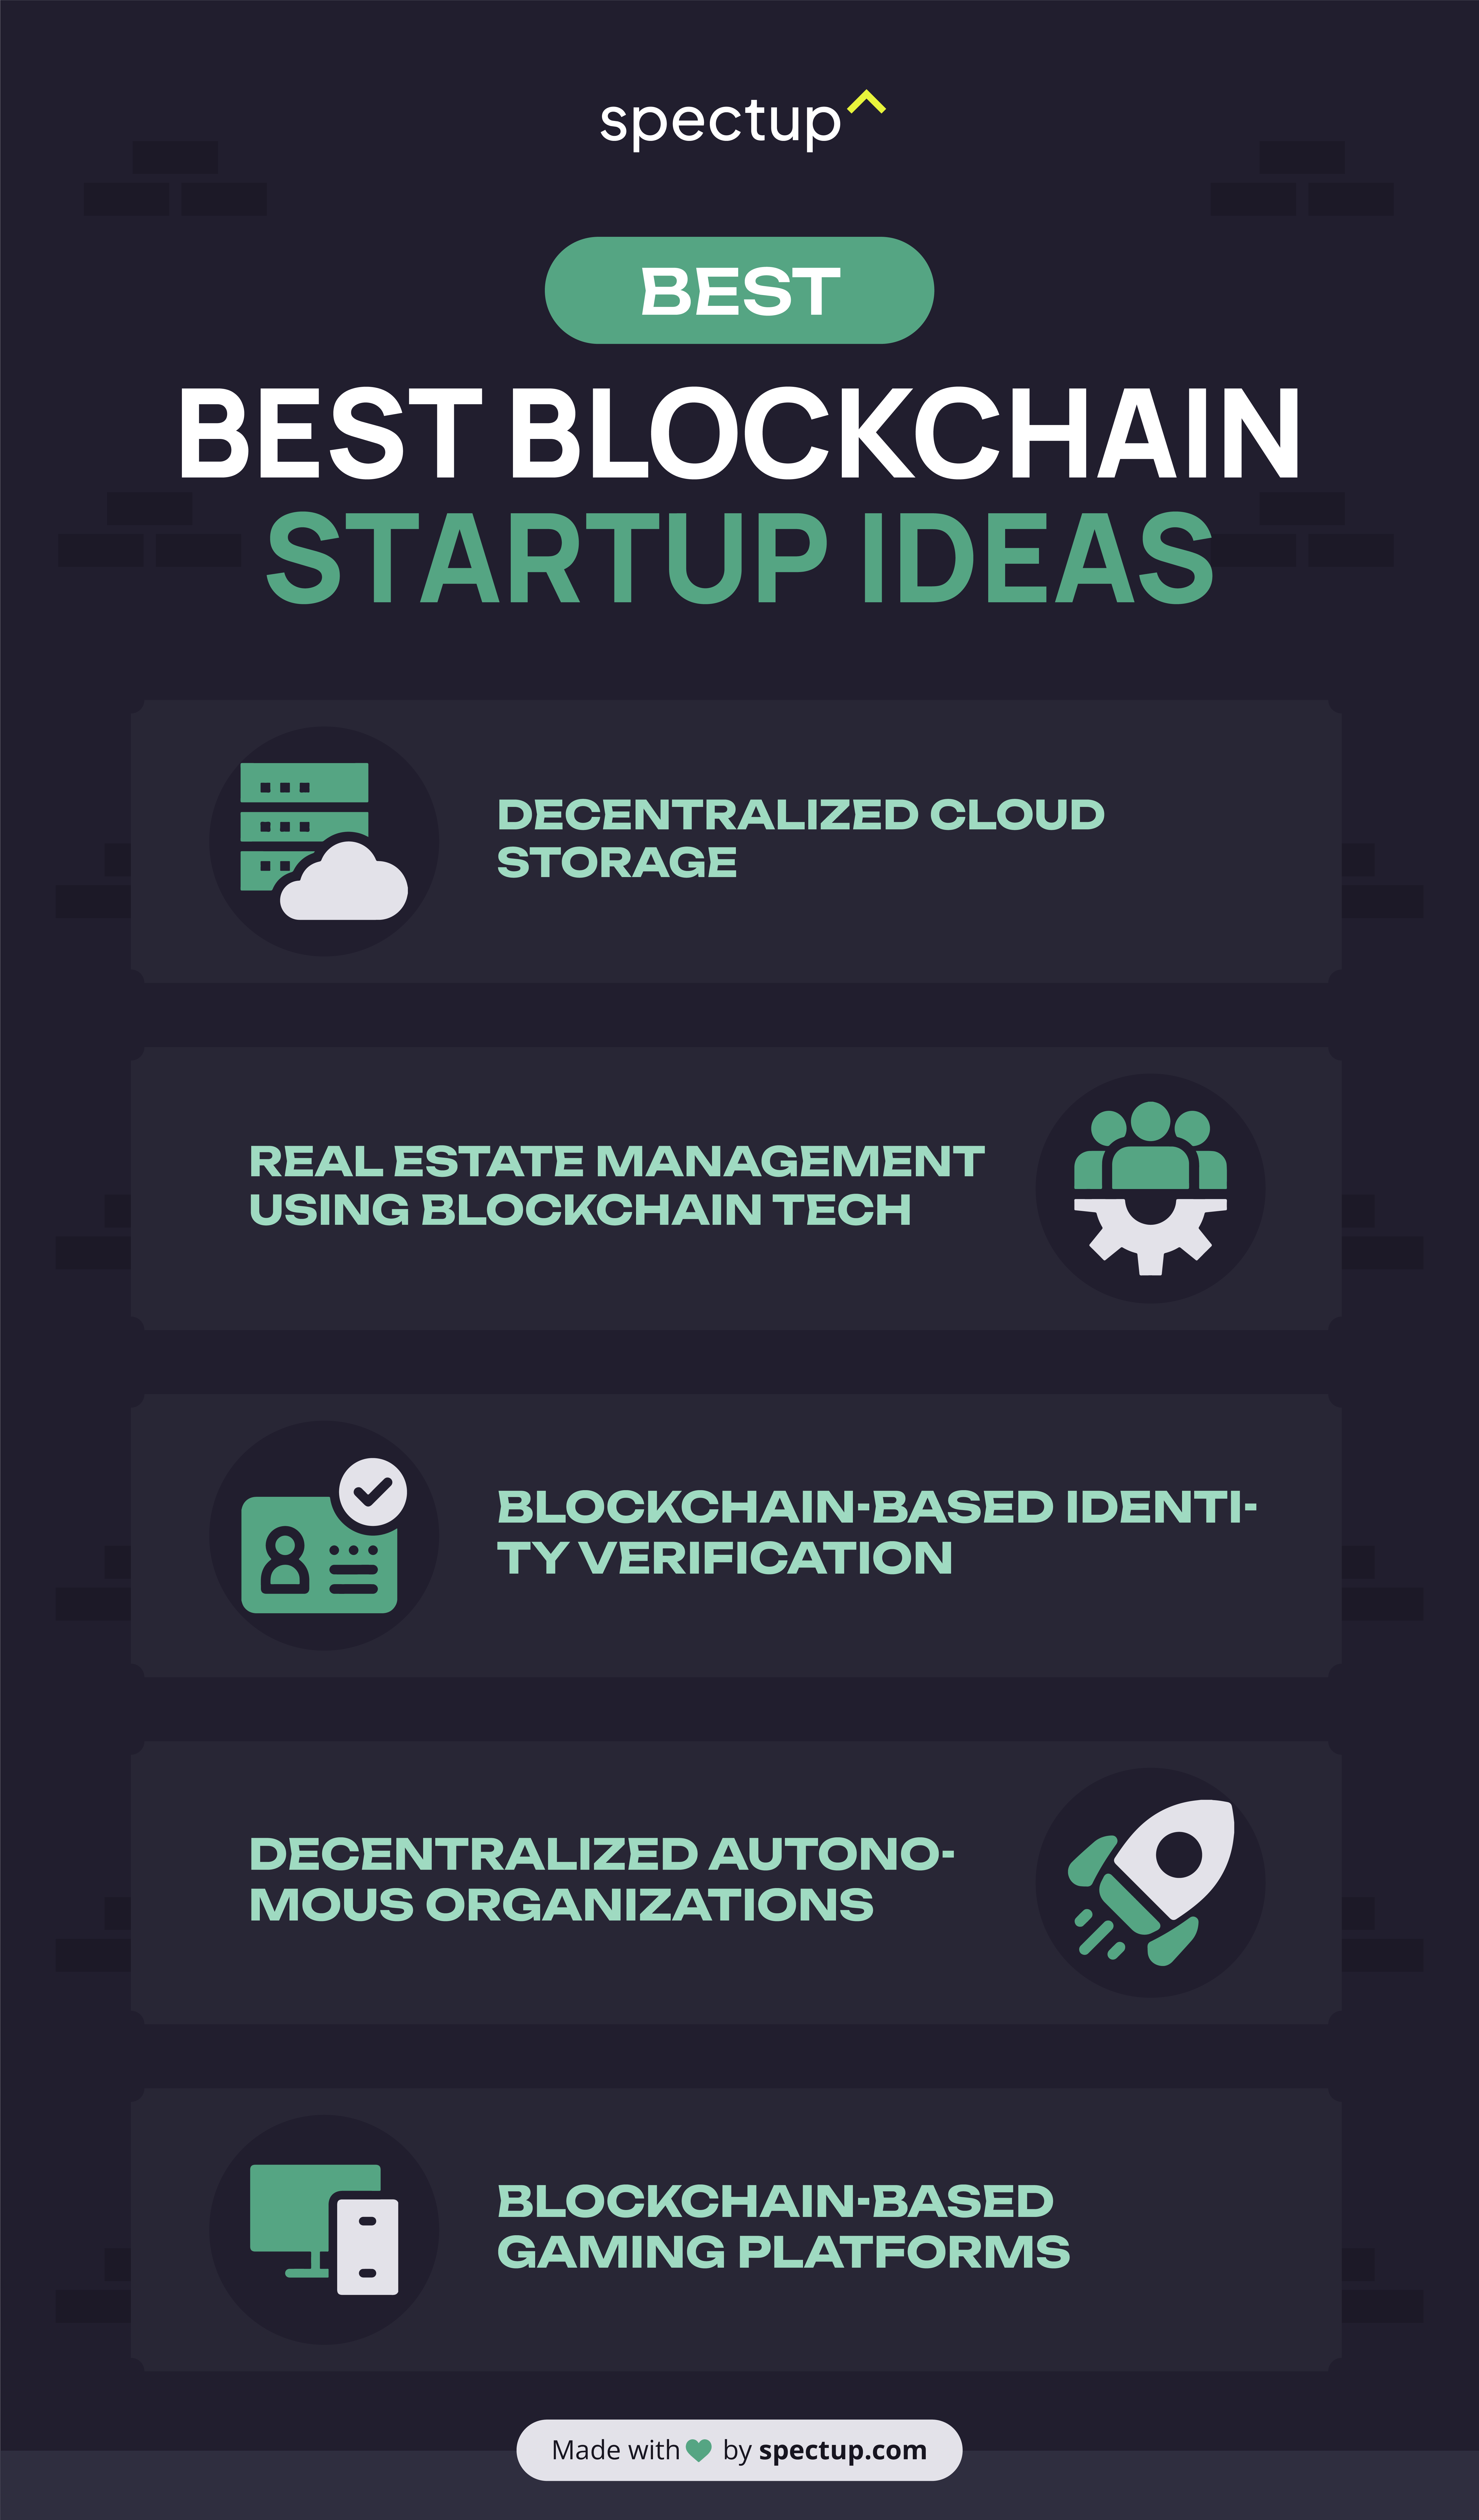 31 blockchain business ideas to capitalize on | Legalzoom